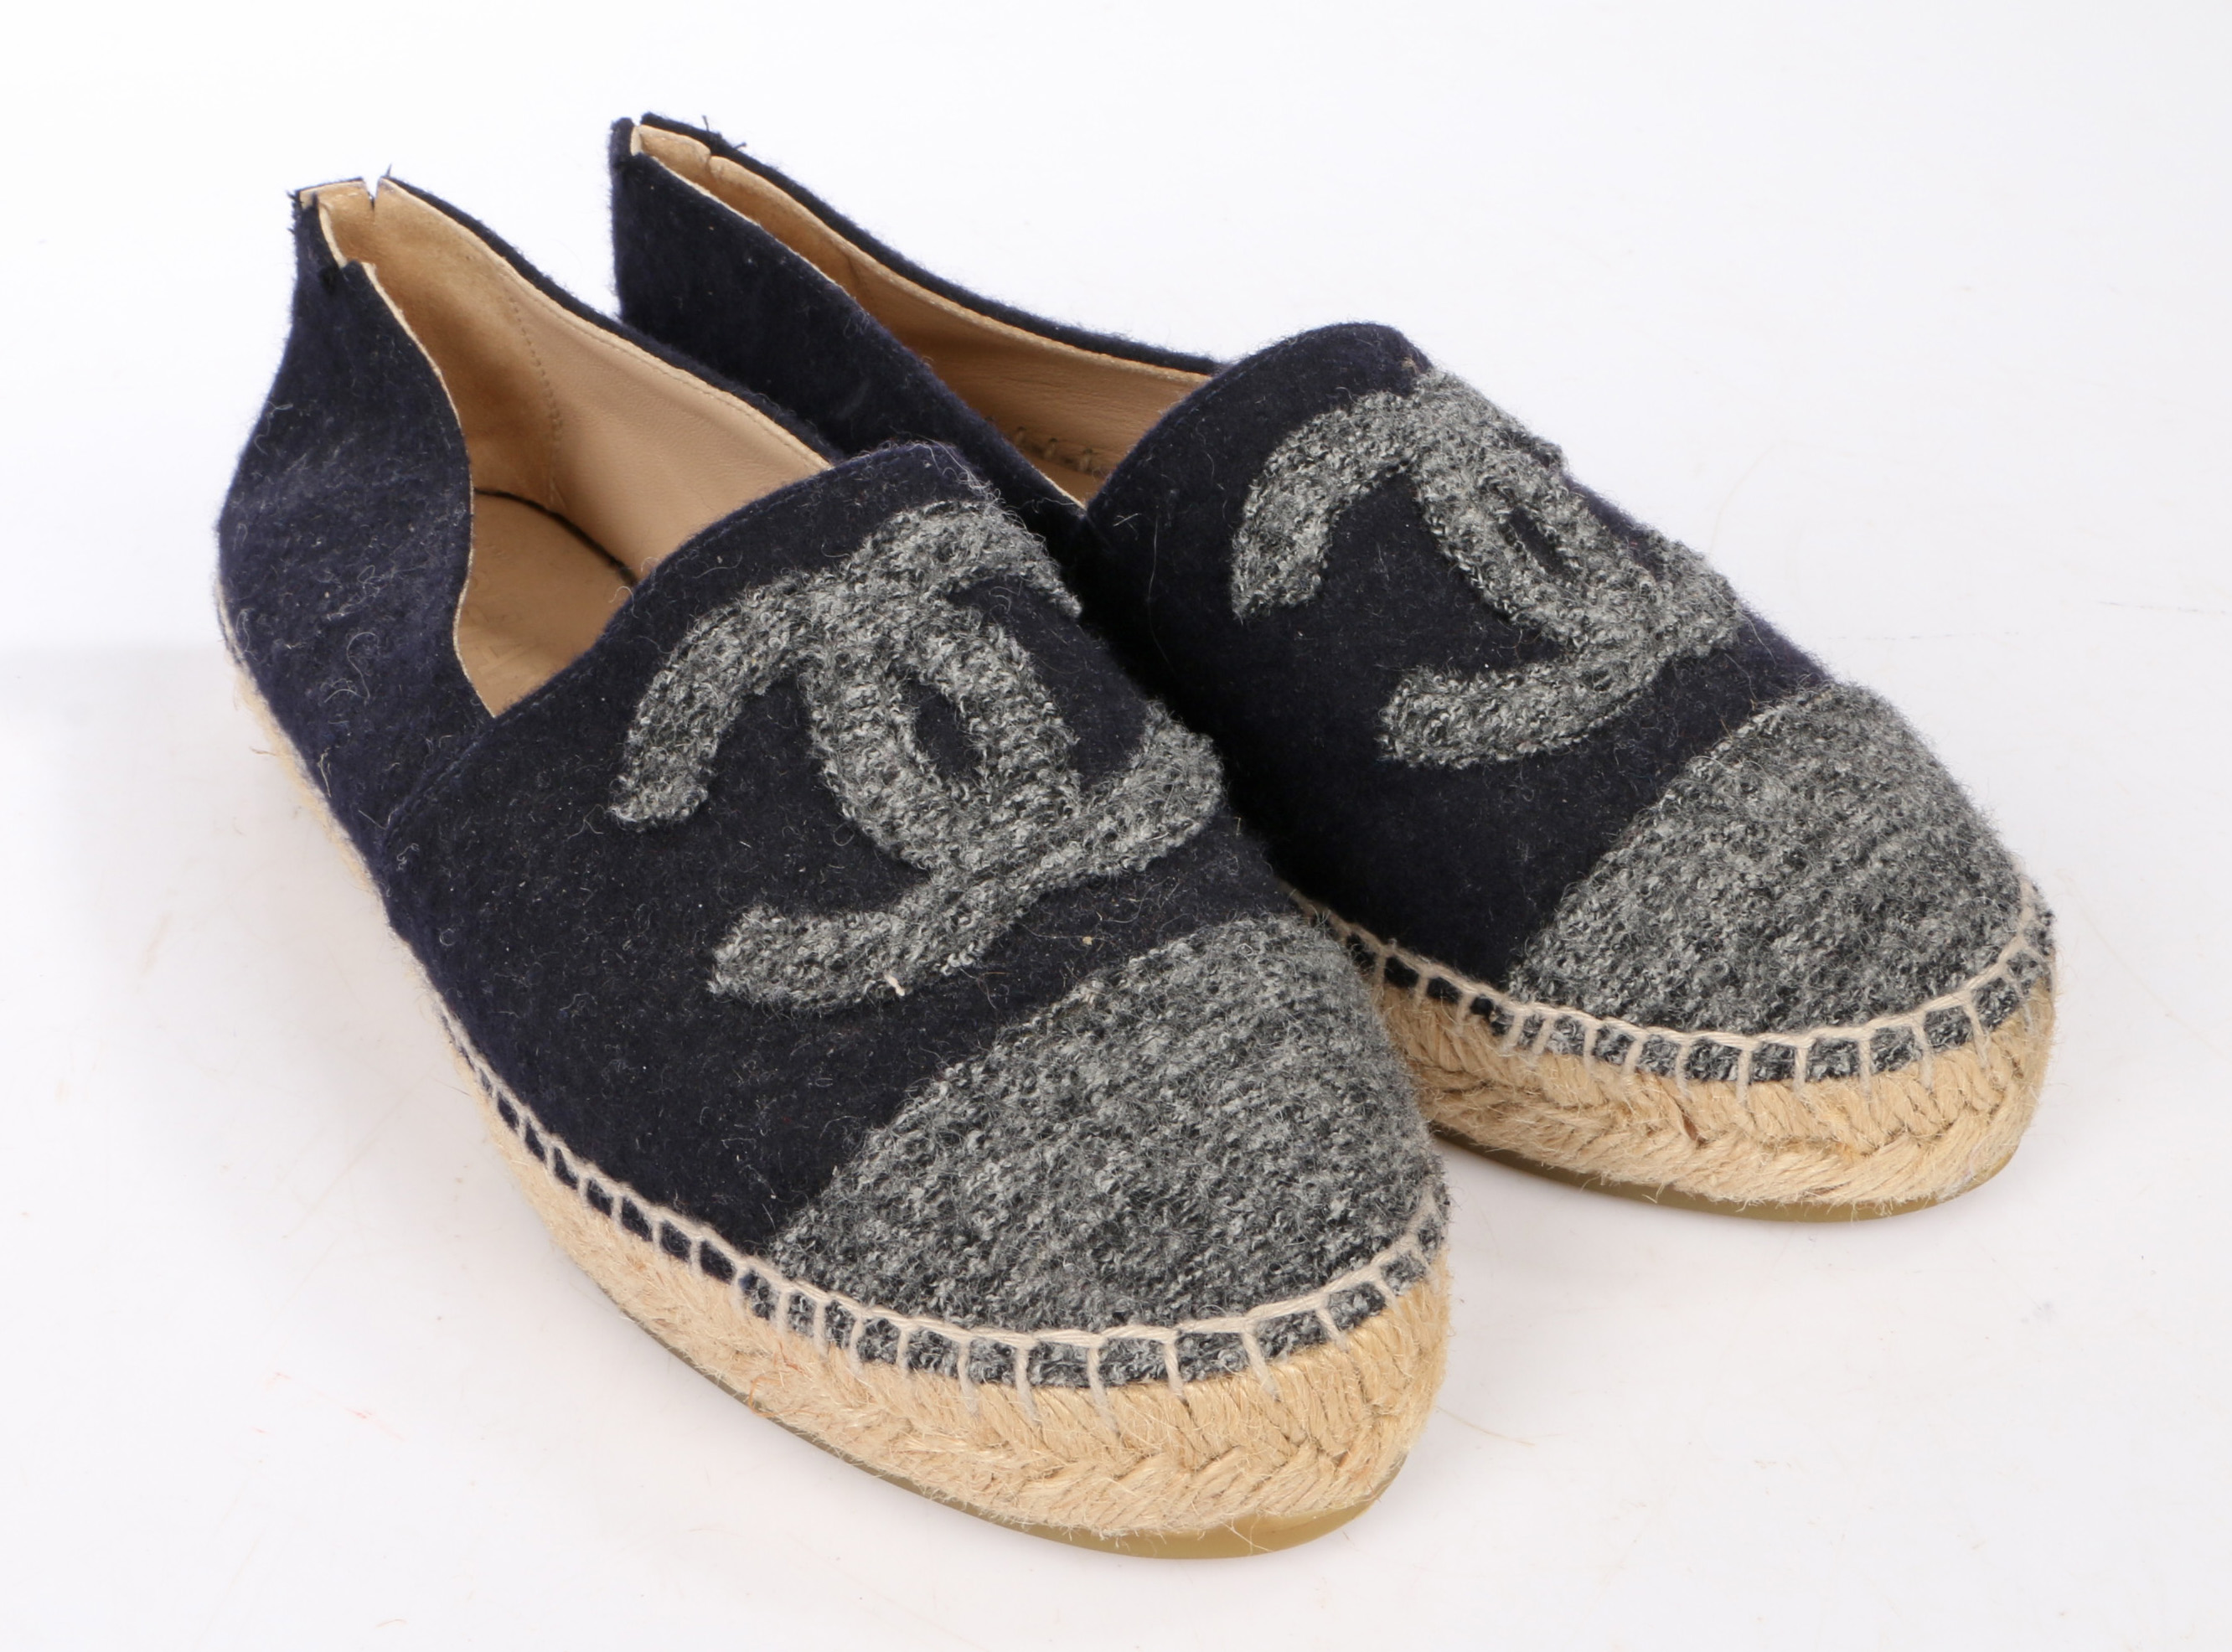 A pair of Chanel black & grey wool espadrille slip on shoes with beige leather lining. Size 35